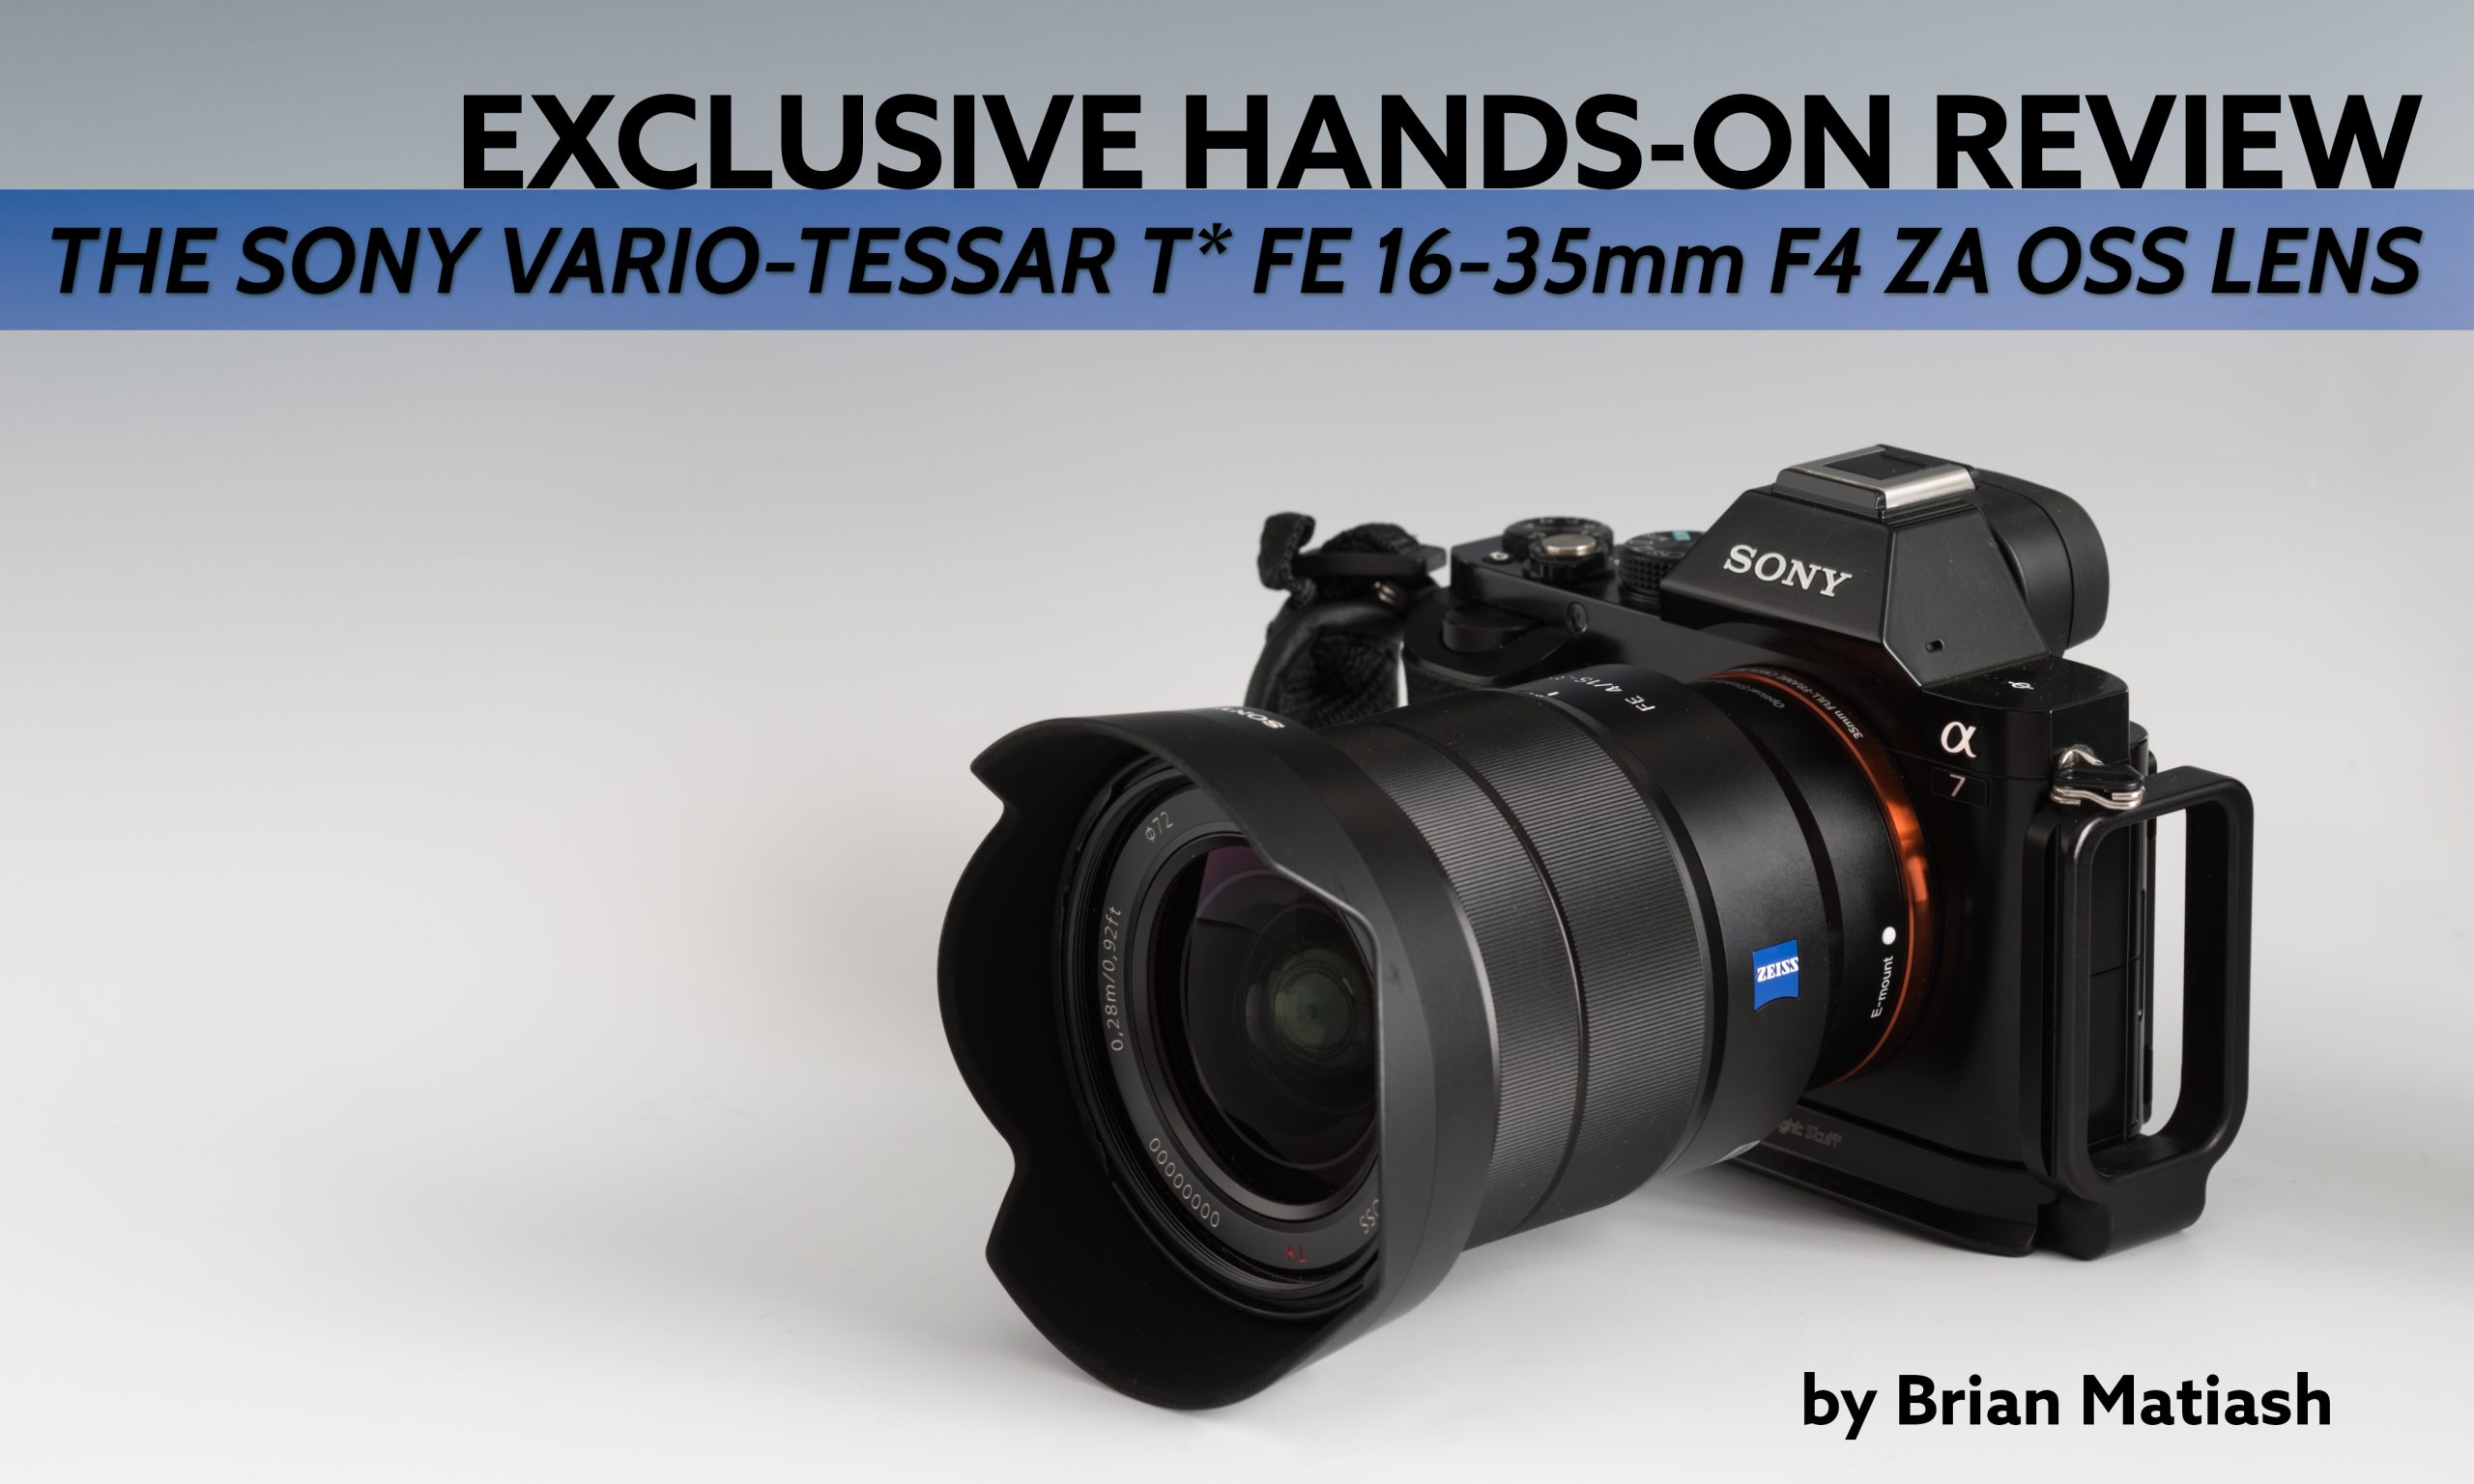 Exclusive Hands-on Review: The Sony Vario-Tessar T* FE 16-35mm F4 